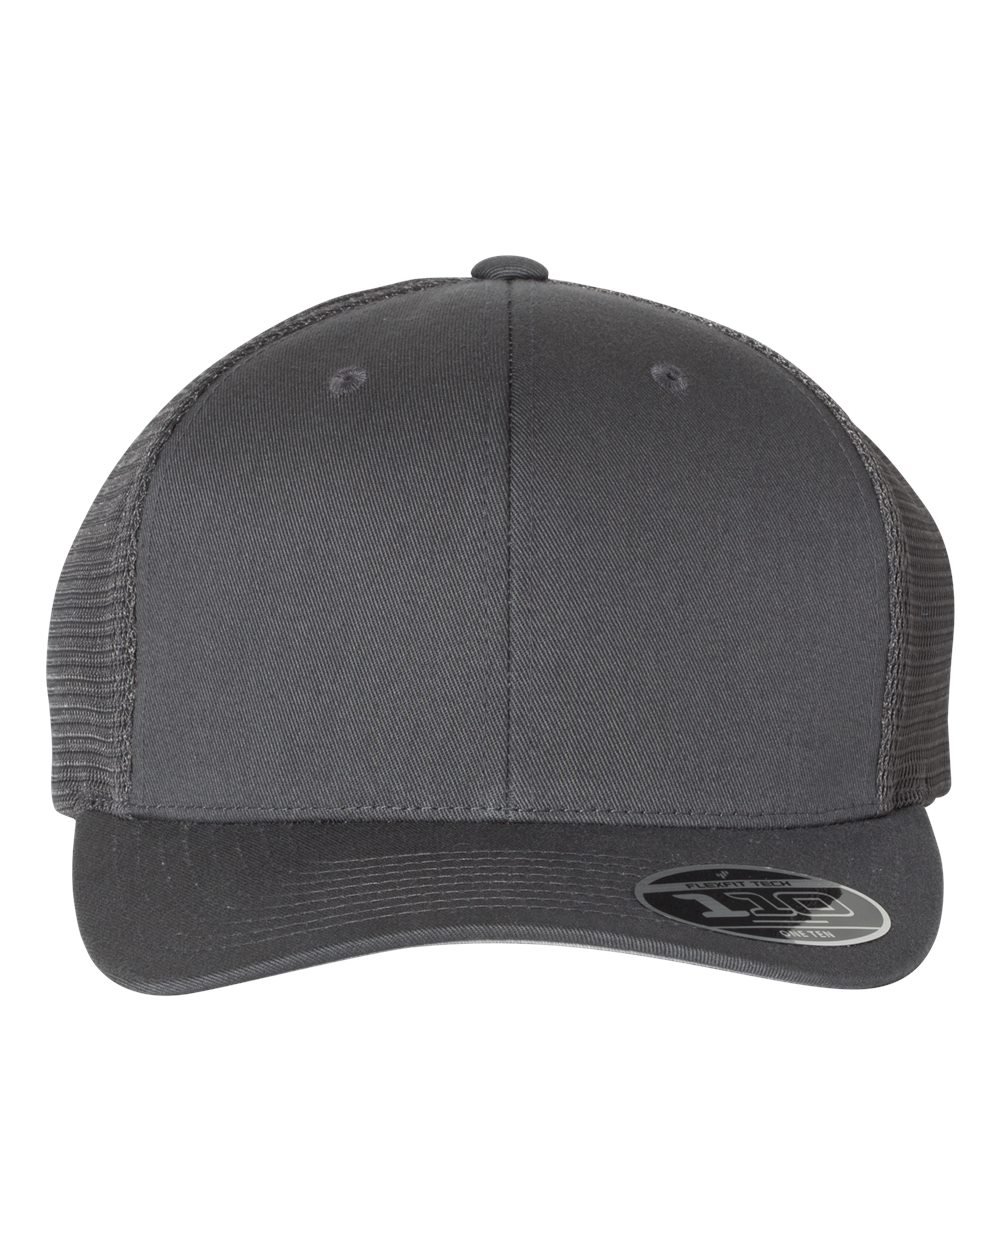 KBVT-793 BLK Chief Skull and Free Spirit Hat Collection Distressed Washed  Cotton Adjustable Fashion Trucker Twill Mesh Cap at  Men's Clothing  store